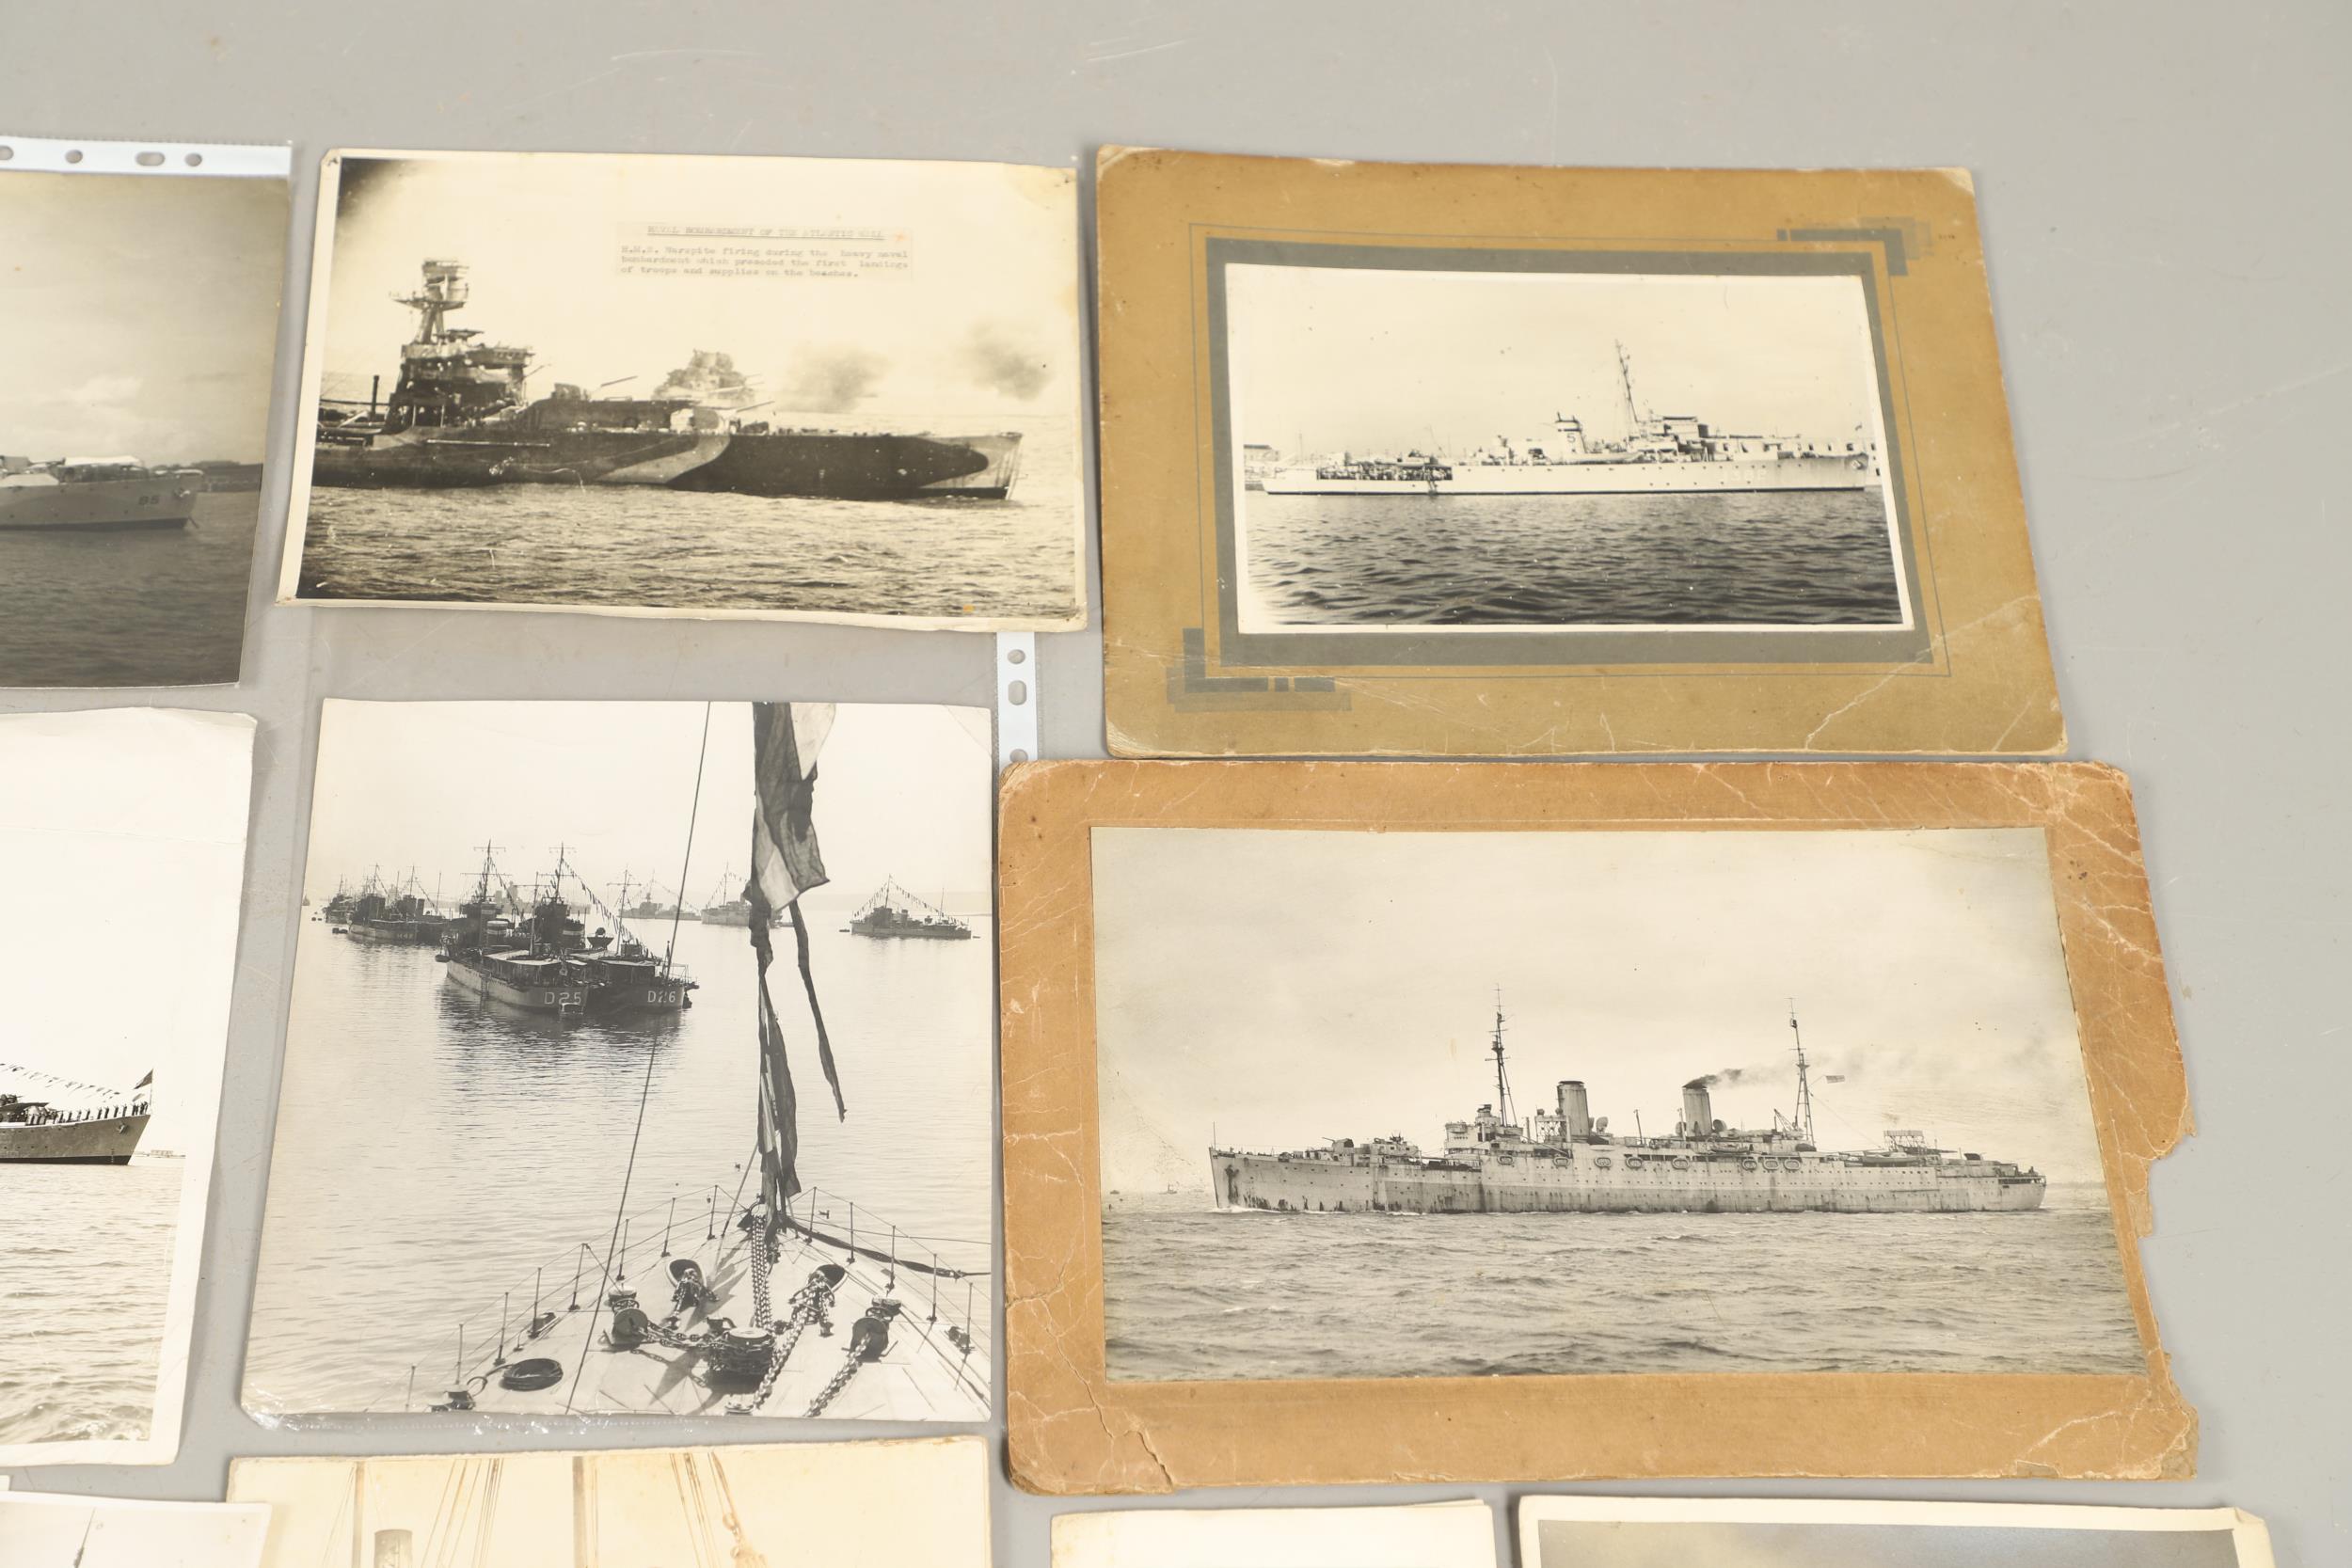 A LARGE AND INTERESTING COLLECTION OF PHOTOGRAPHS OF NAVAL RELATED SUBJECTS. - Image 21 of 22